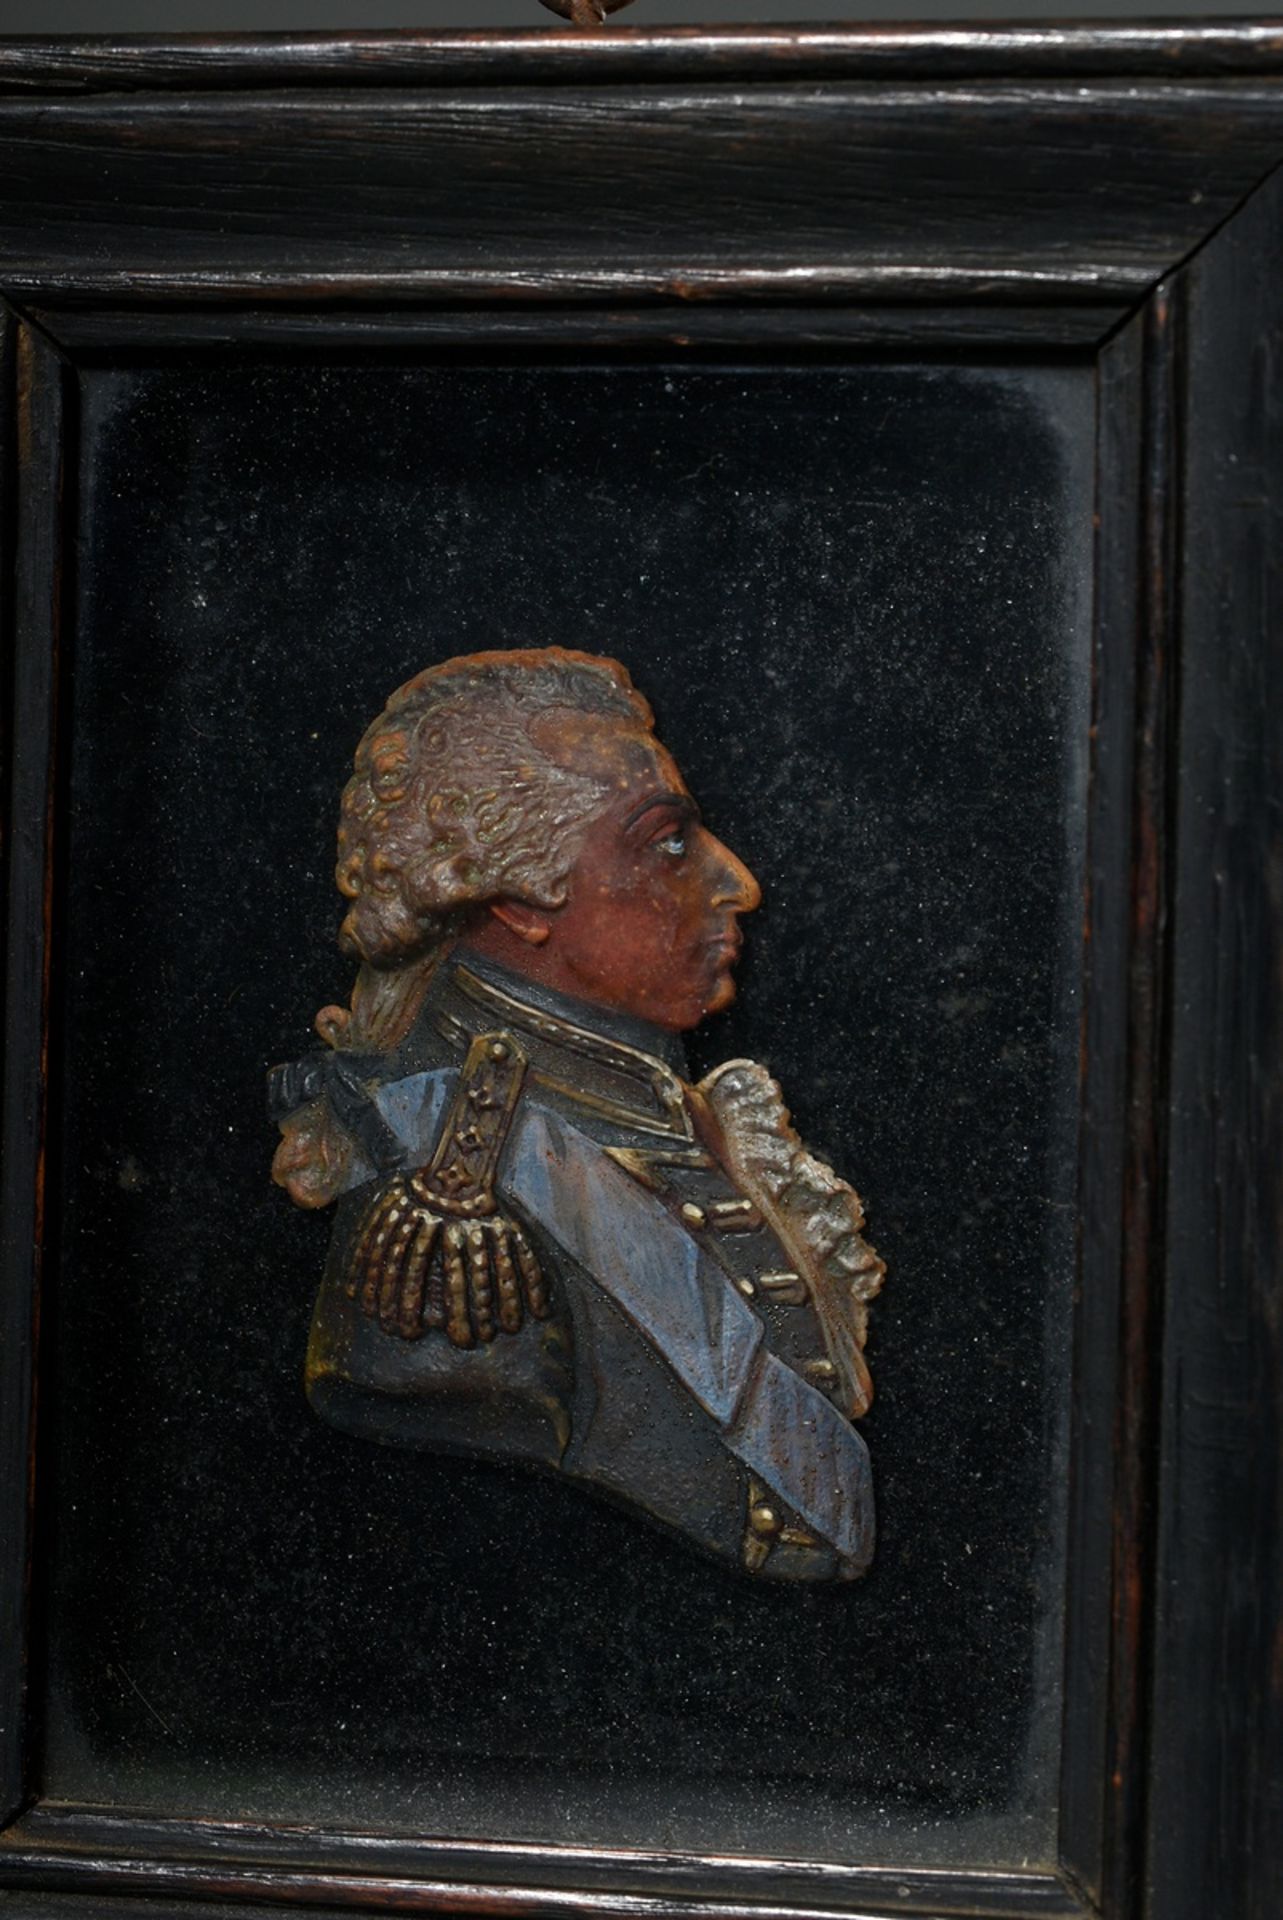 4 Various sculptural wax portraits in half relief: "Horatio Nelson, 1st Viscount Nelson (1758-1805) - Image 4 of 11